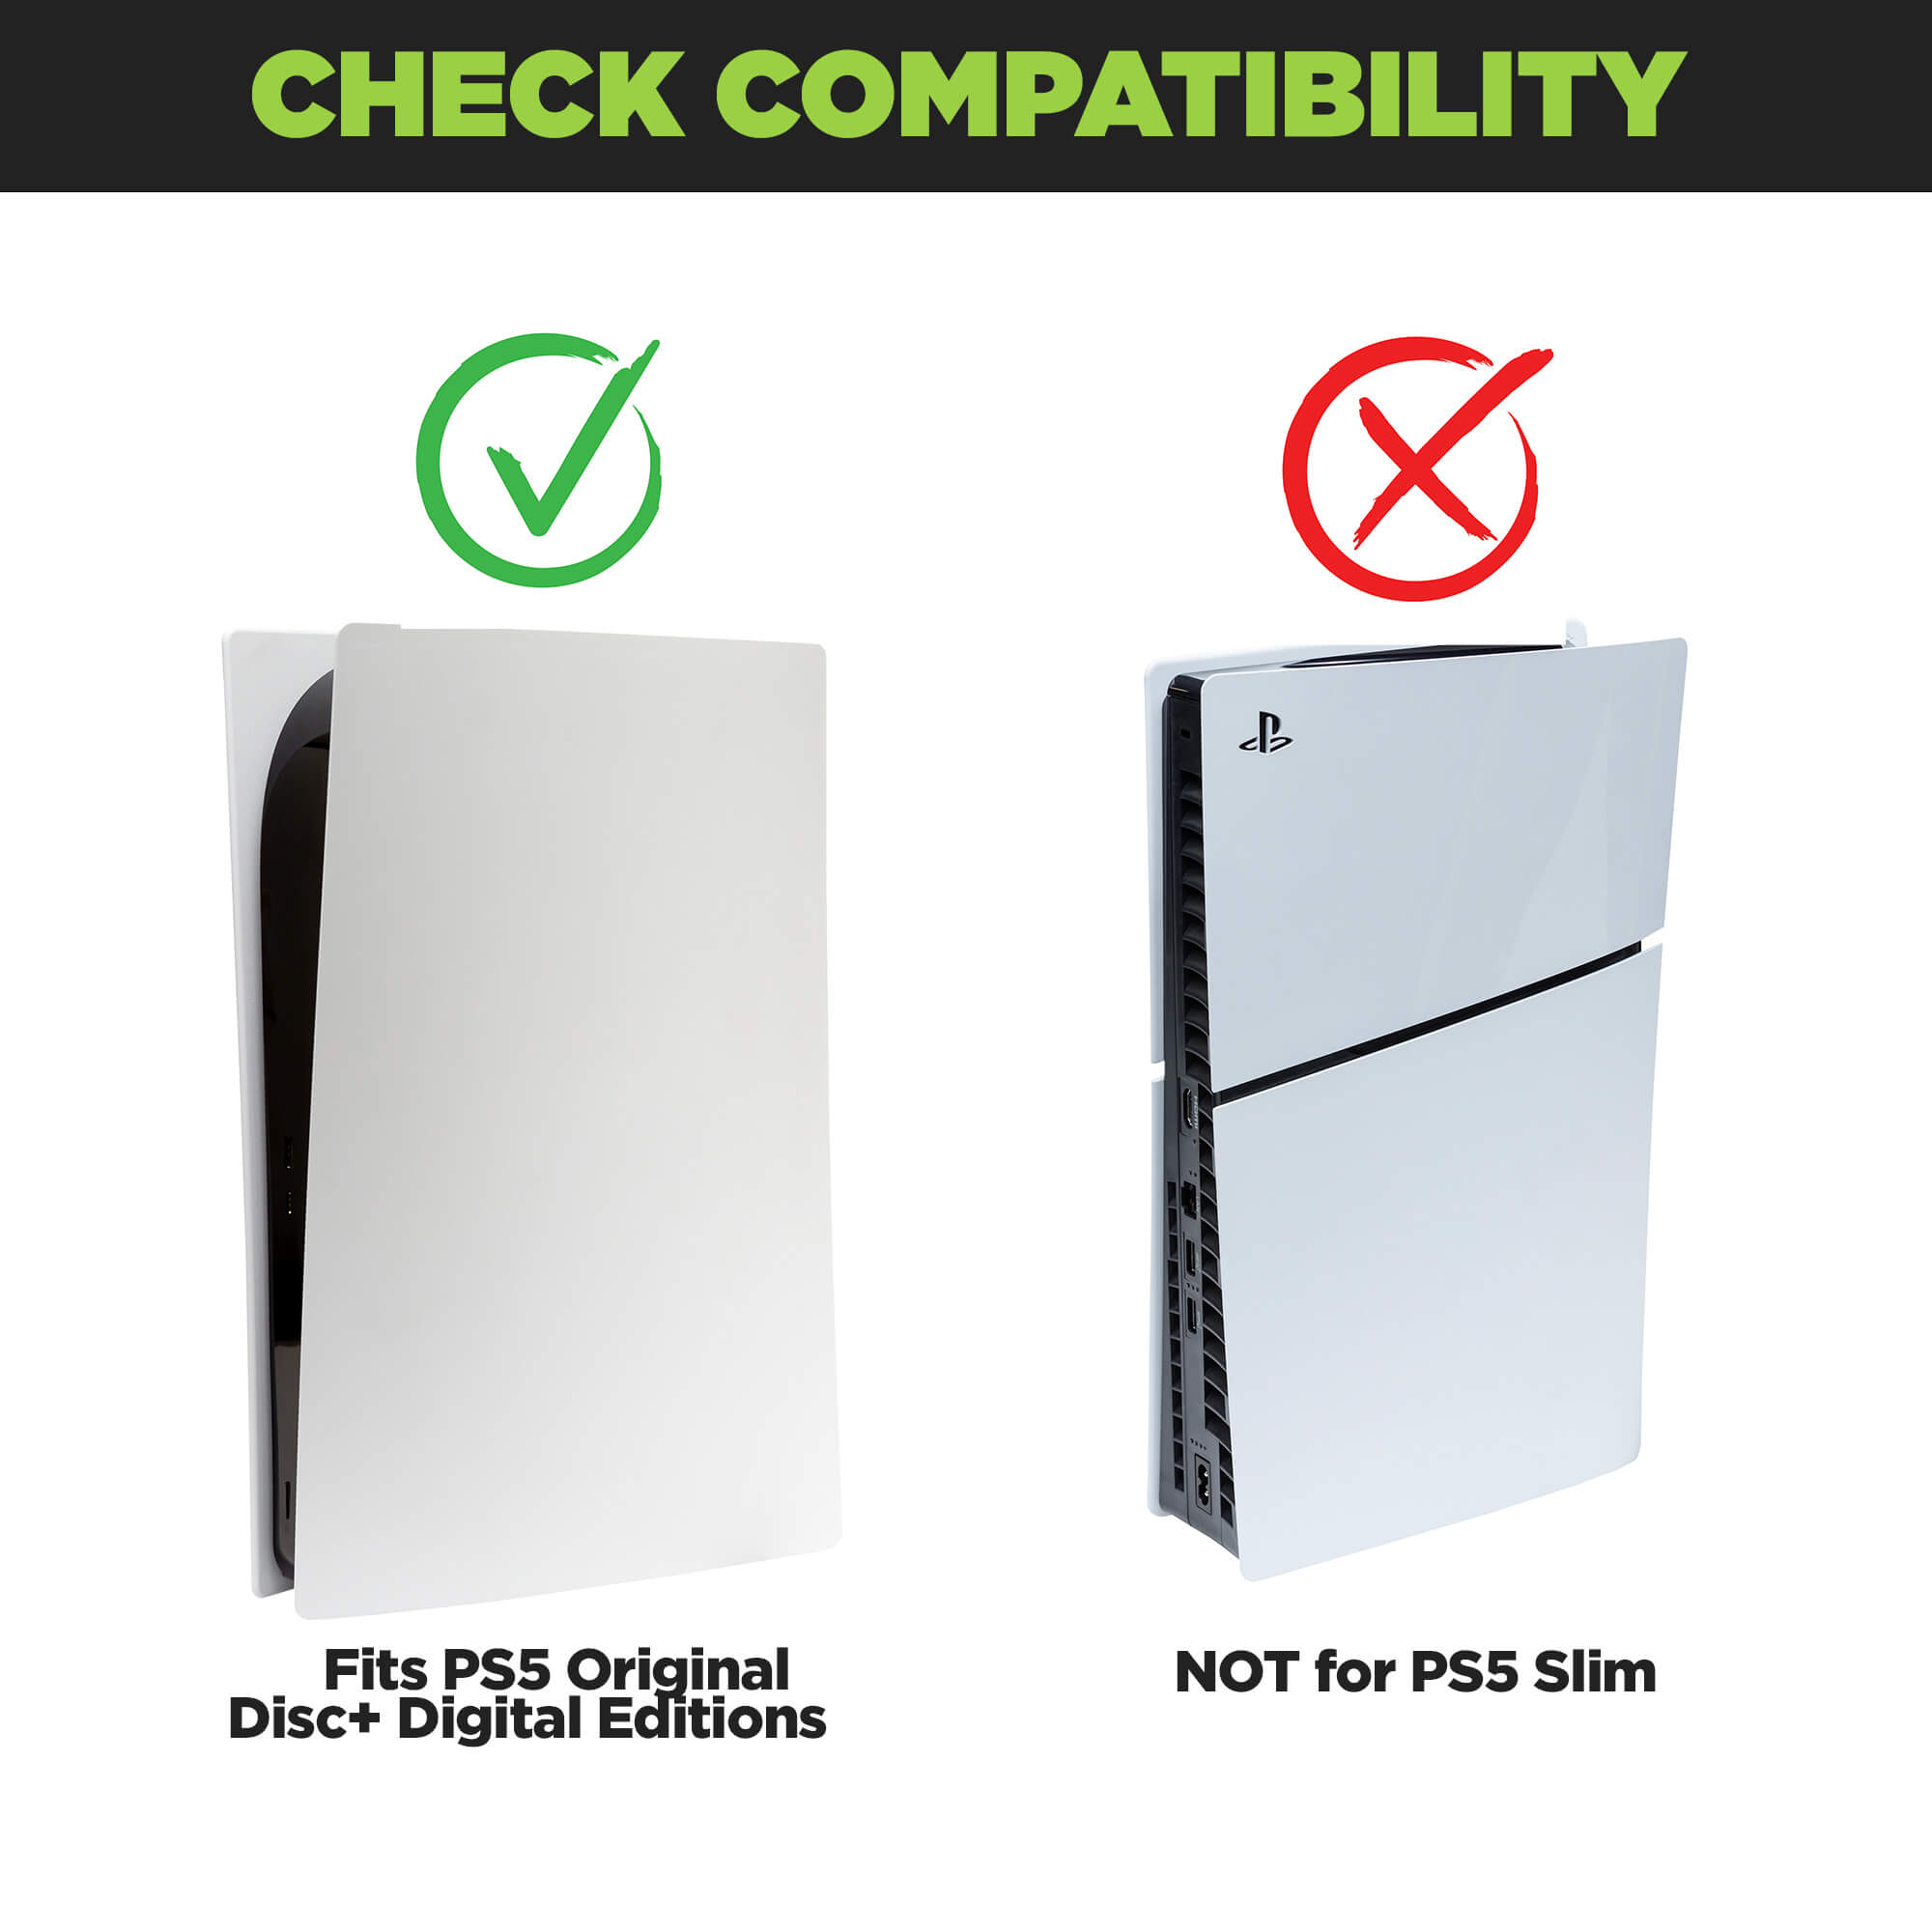 HIDEit PS5 Mount is compatible with the original PS5, not the PS5 Slim.